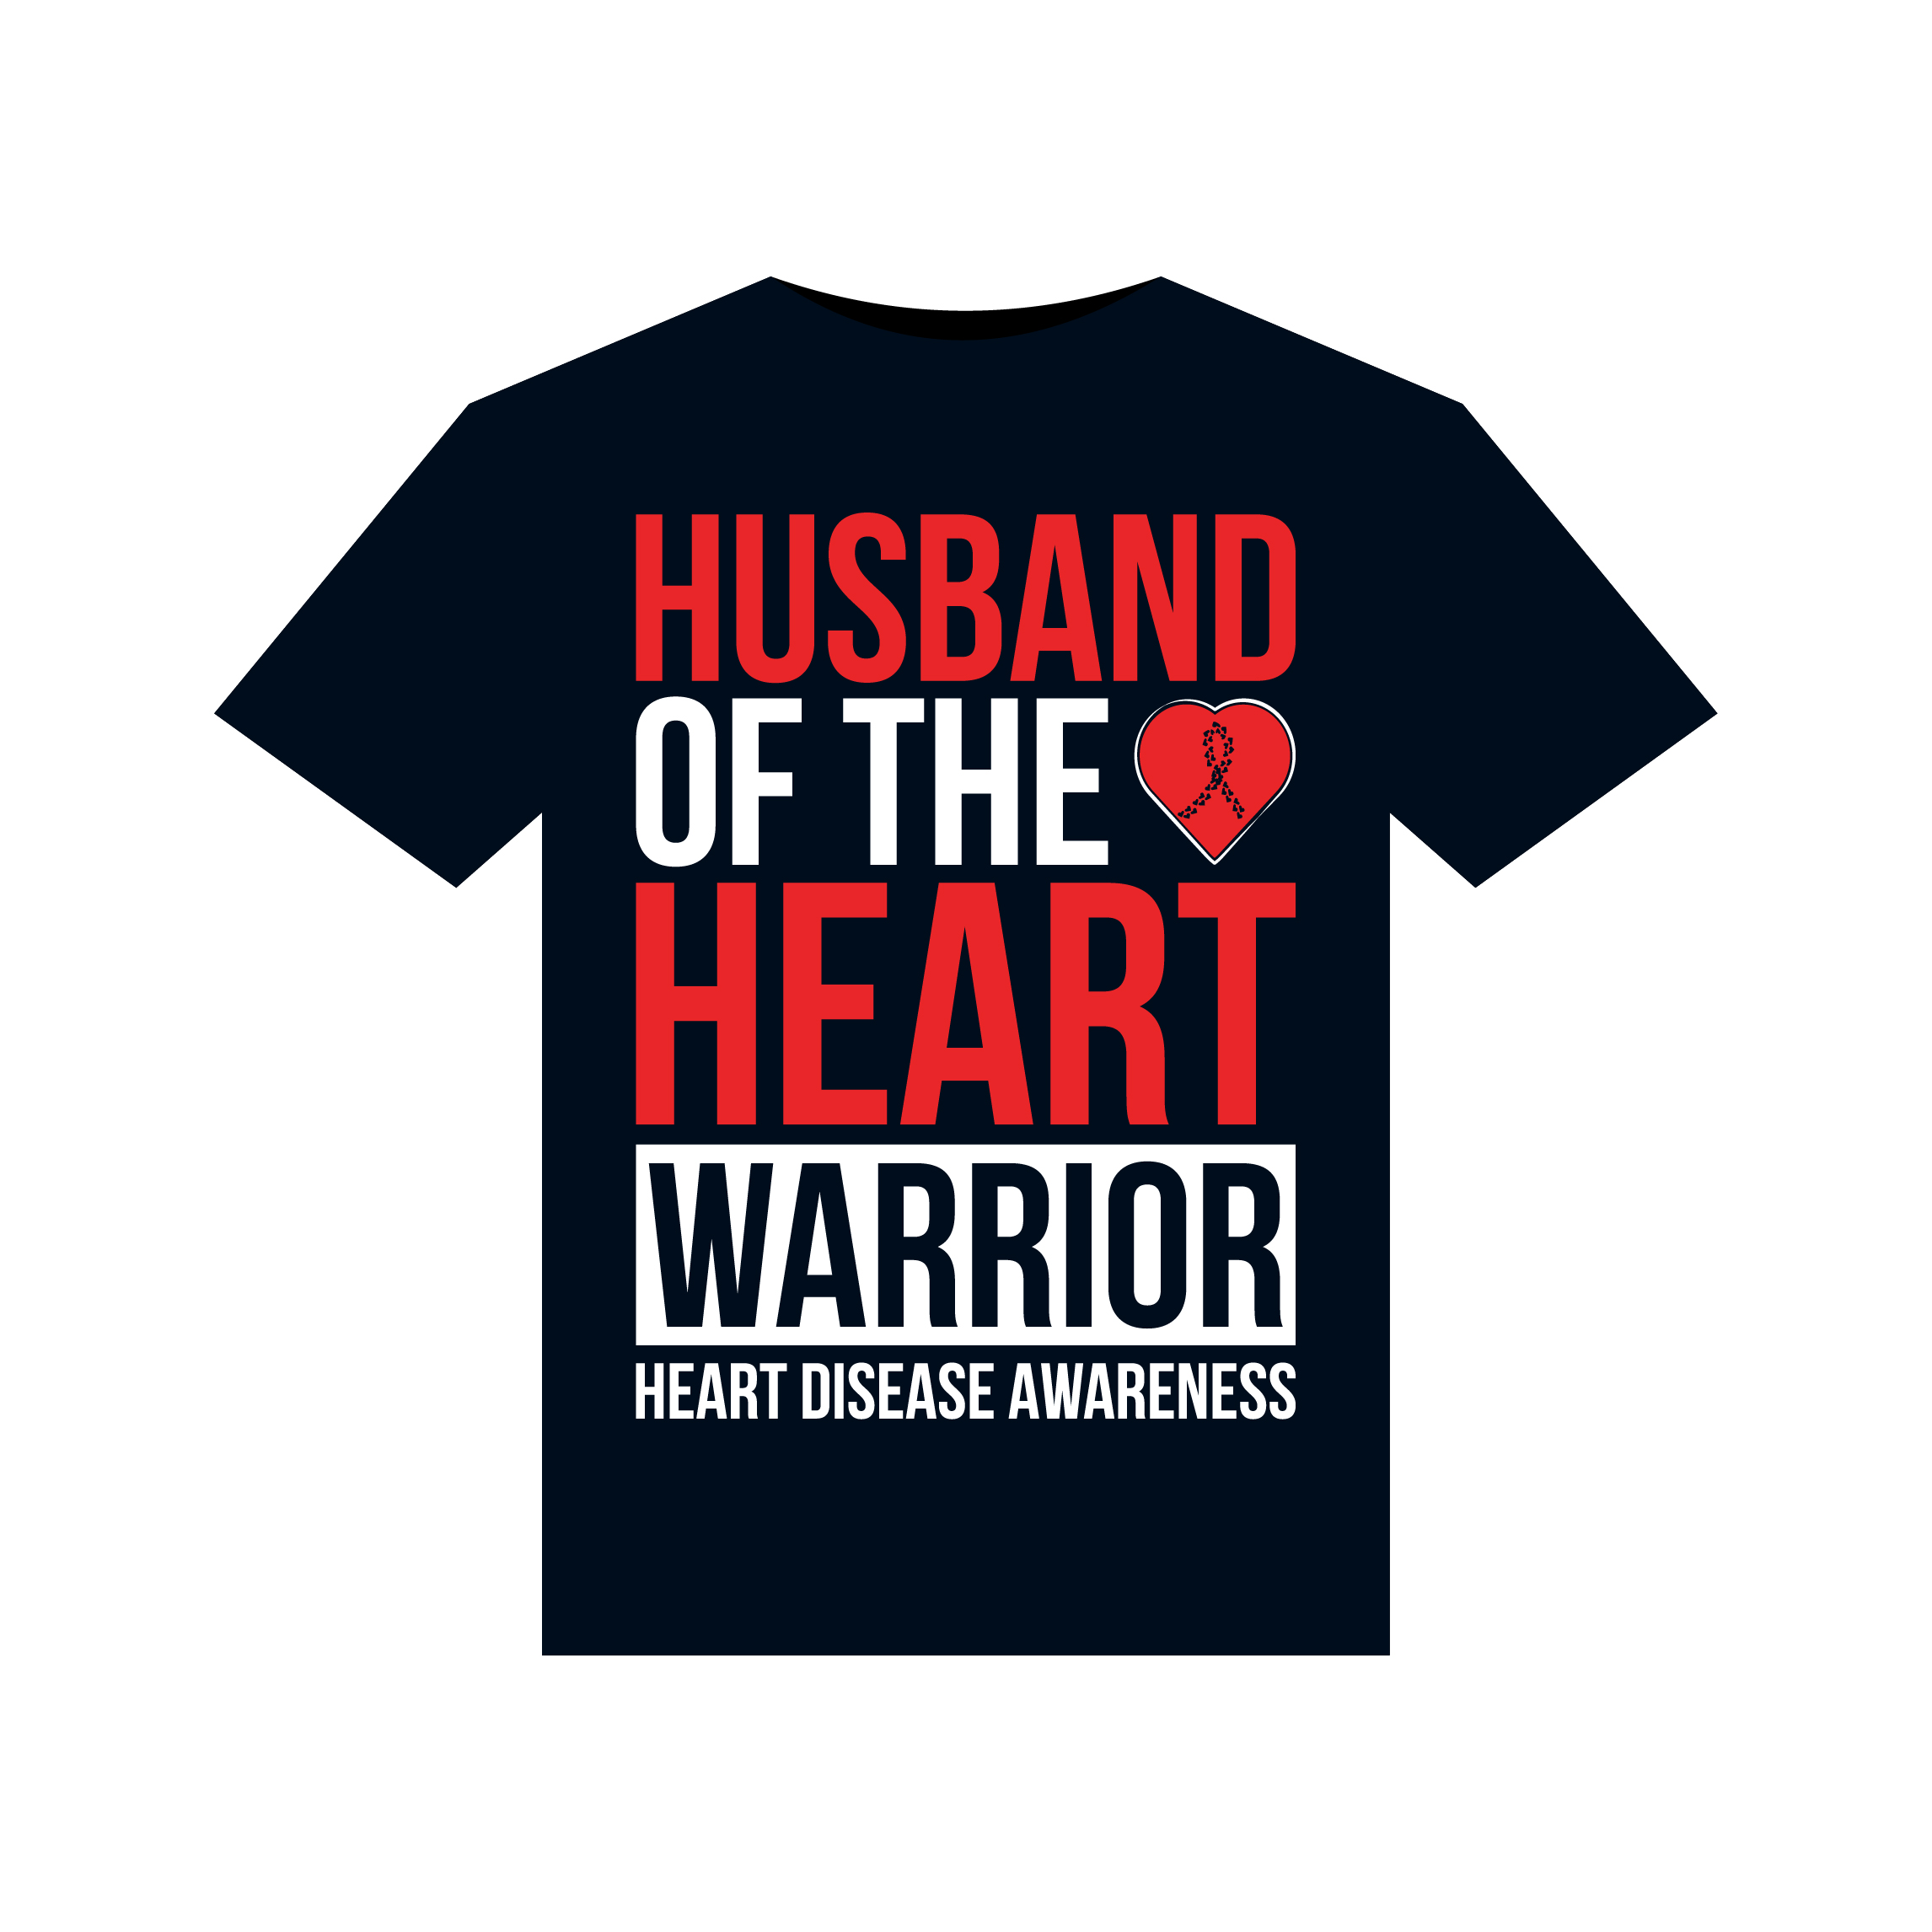 Husband of the Heart Warrior Heart Disease Awareness illustrations for print-ready T-Shirts design preview image.